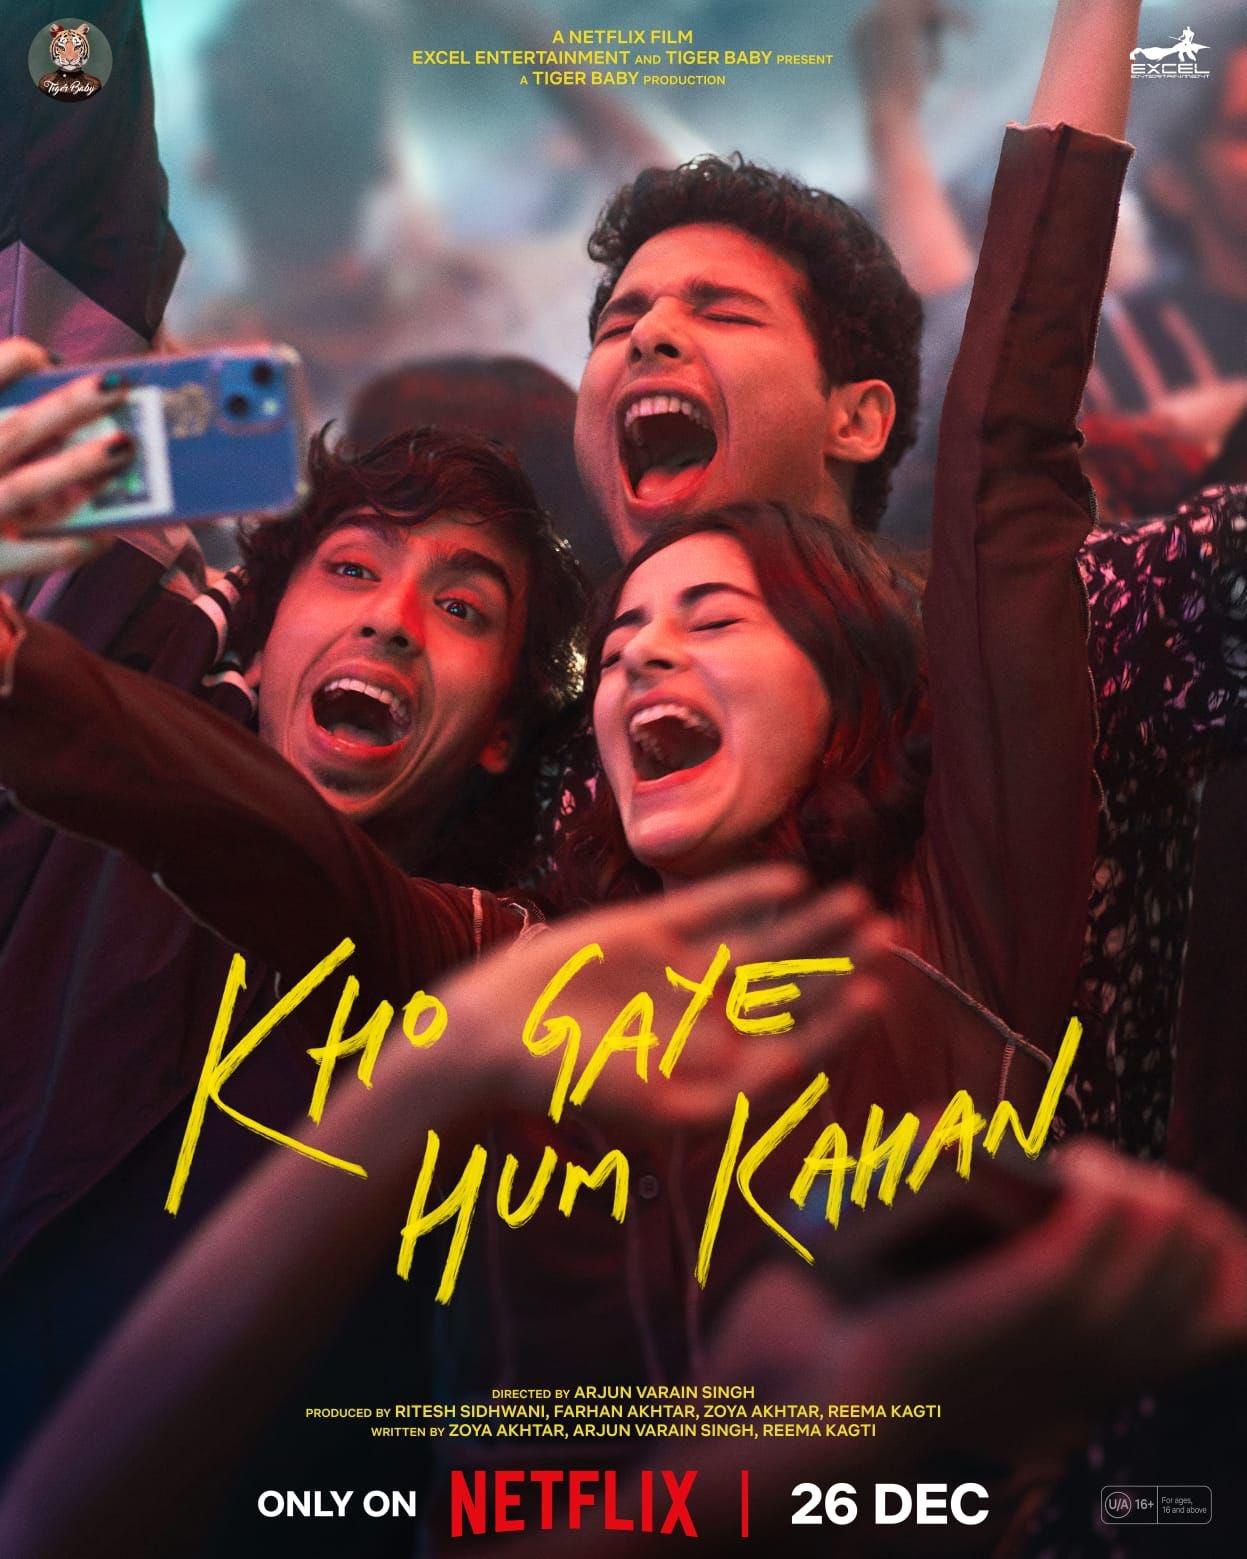 Kho Gaye Hum Kahan (December 26) - NetflixFollow the intertwined lives of three close friends managing relationships, emotions, and aspirations in Mumbai. Experience their journey exclusively on Netflix from December 26, 2023, directed by Arjun Varain Singh.